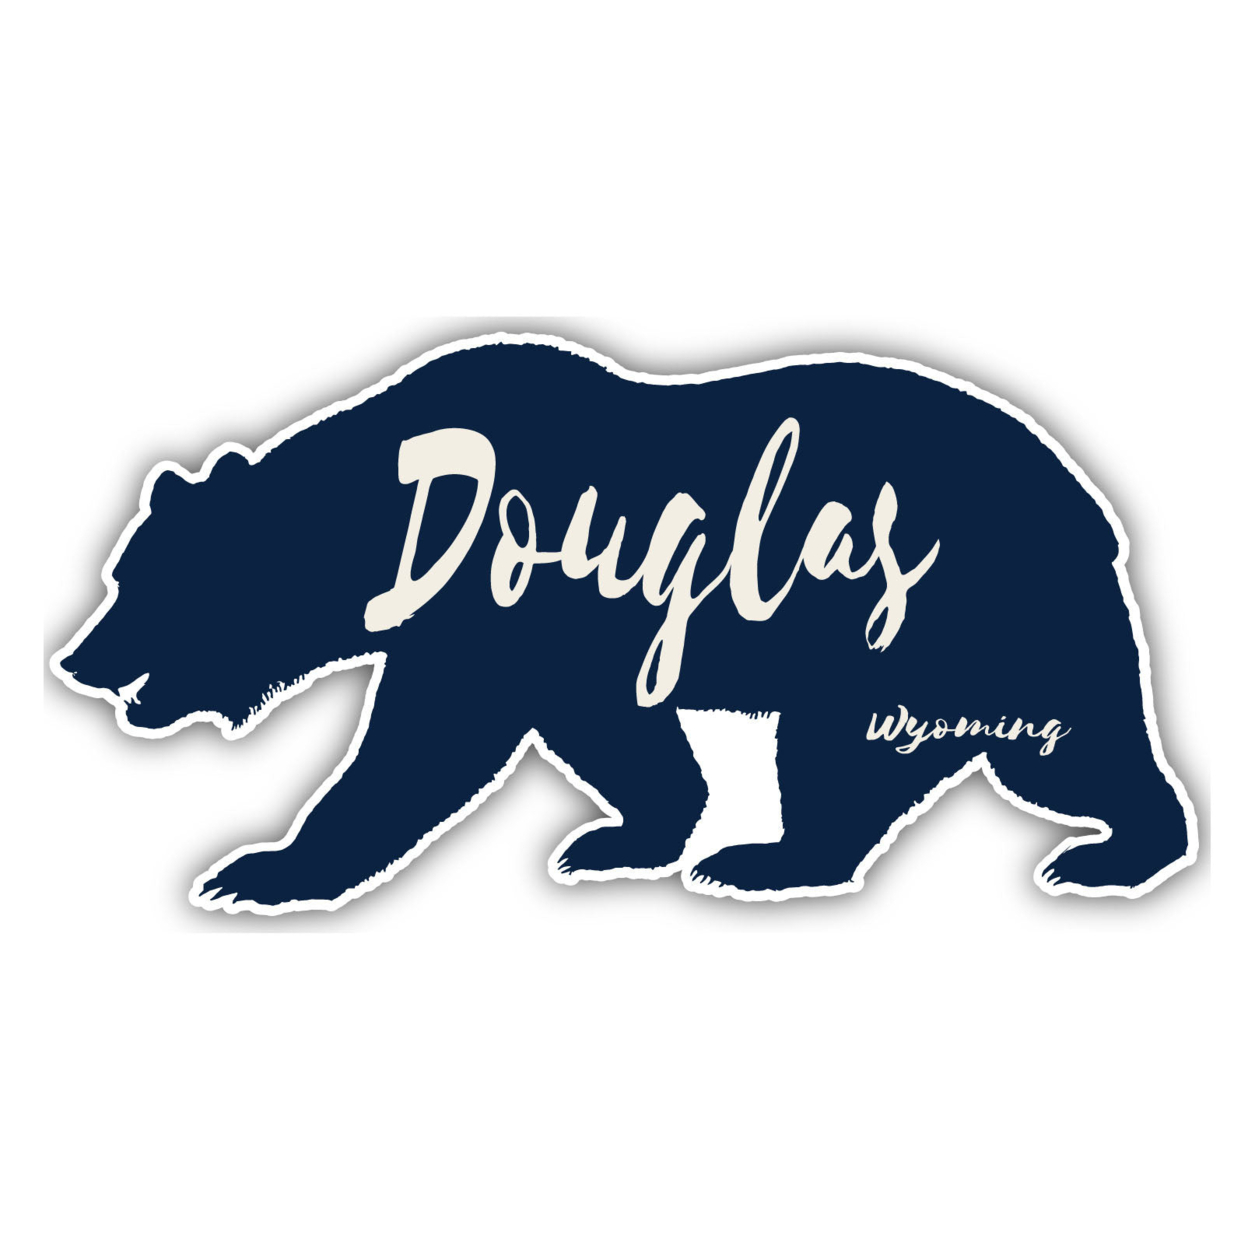 Douglas Wyoming Souvenir Decorative Stickers (Choose Theme And Size) - 4-Pack, 4-Inch, Bear